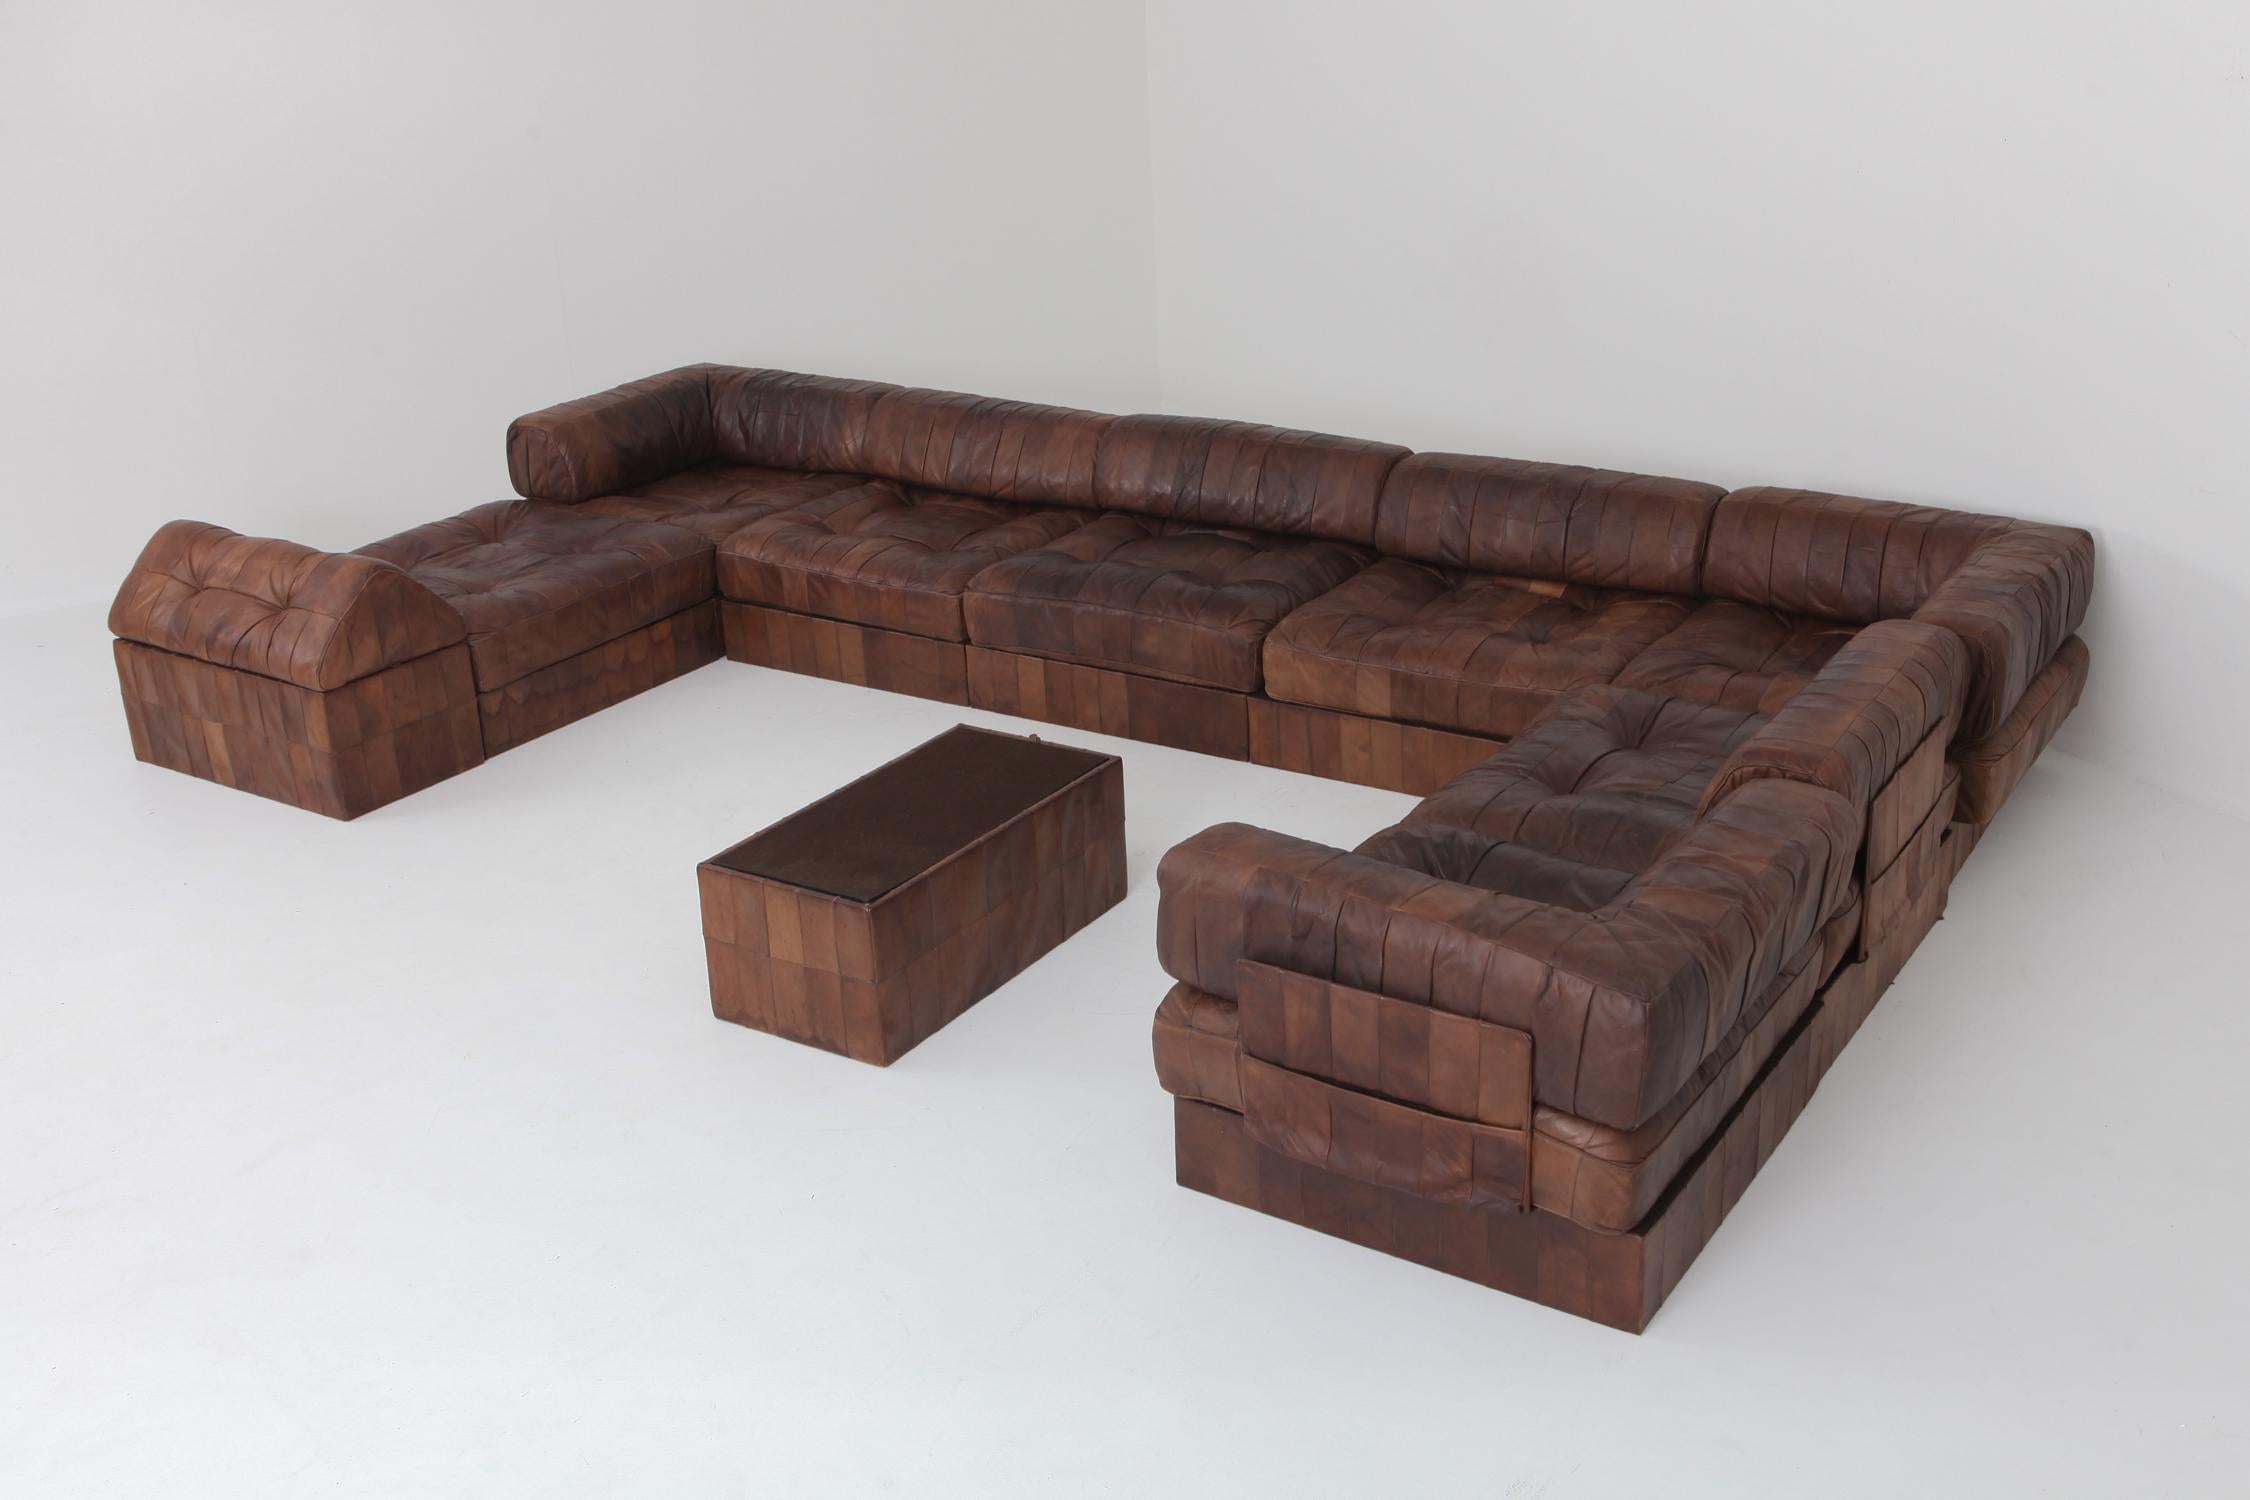 DS 88 sectional sofa in patchwork brown-cognac leather. 

Hand built in the 1970s to incredibly high standards by De Sede craftsman in Switzerland. Made of eight sections, each with a base leather patchwork cushion and a back cushion made from the